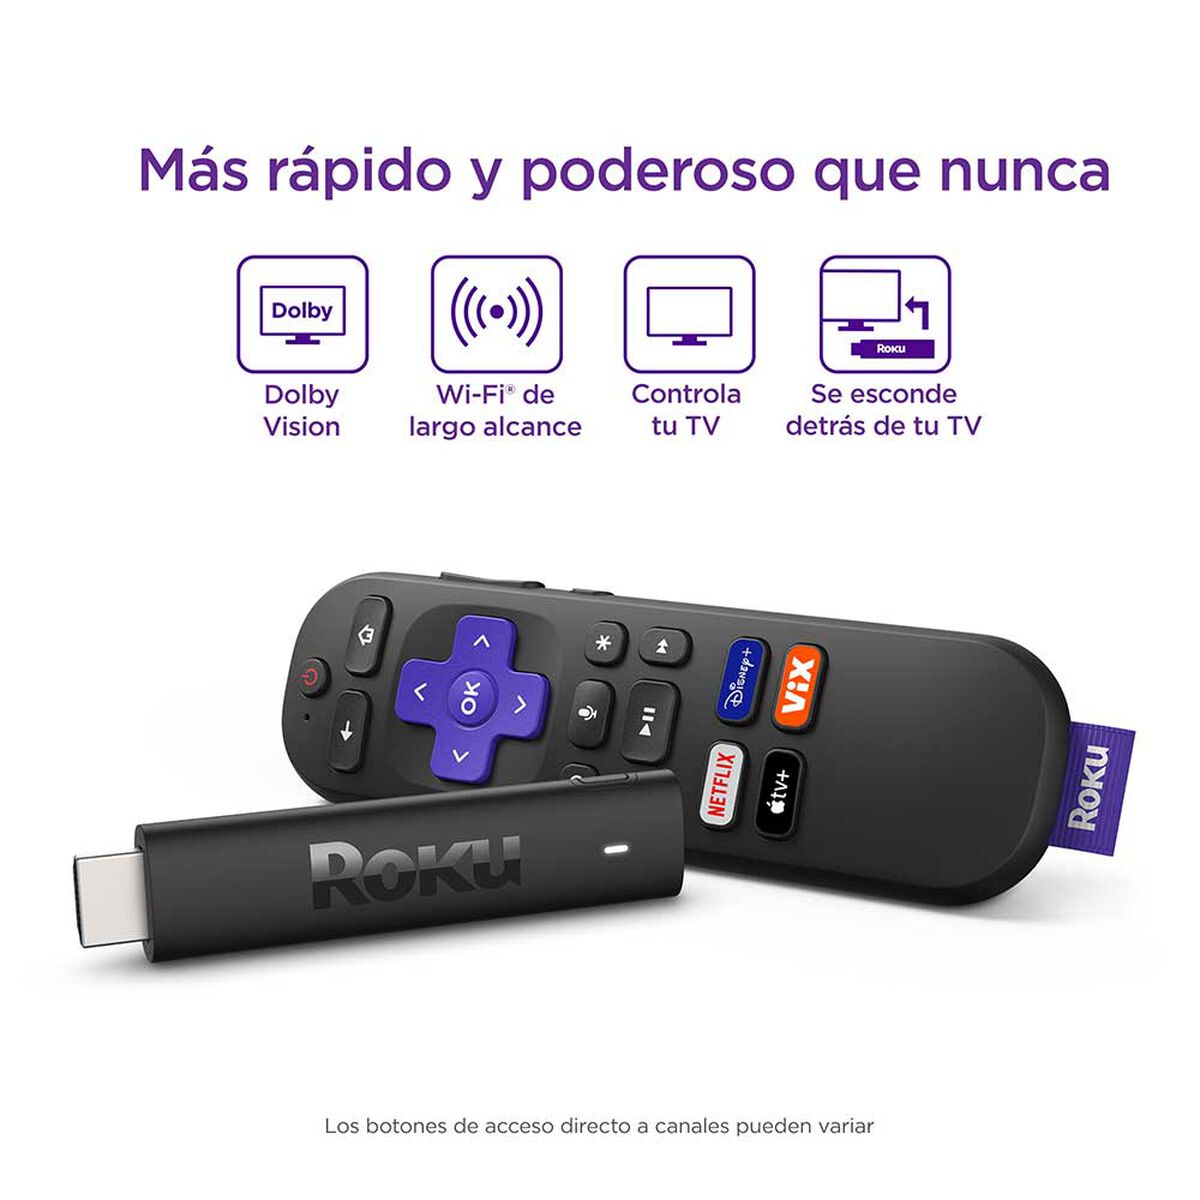 Reproductor Streaming Roku Stick+ 3810MX